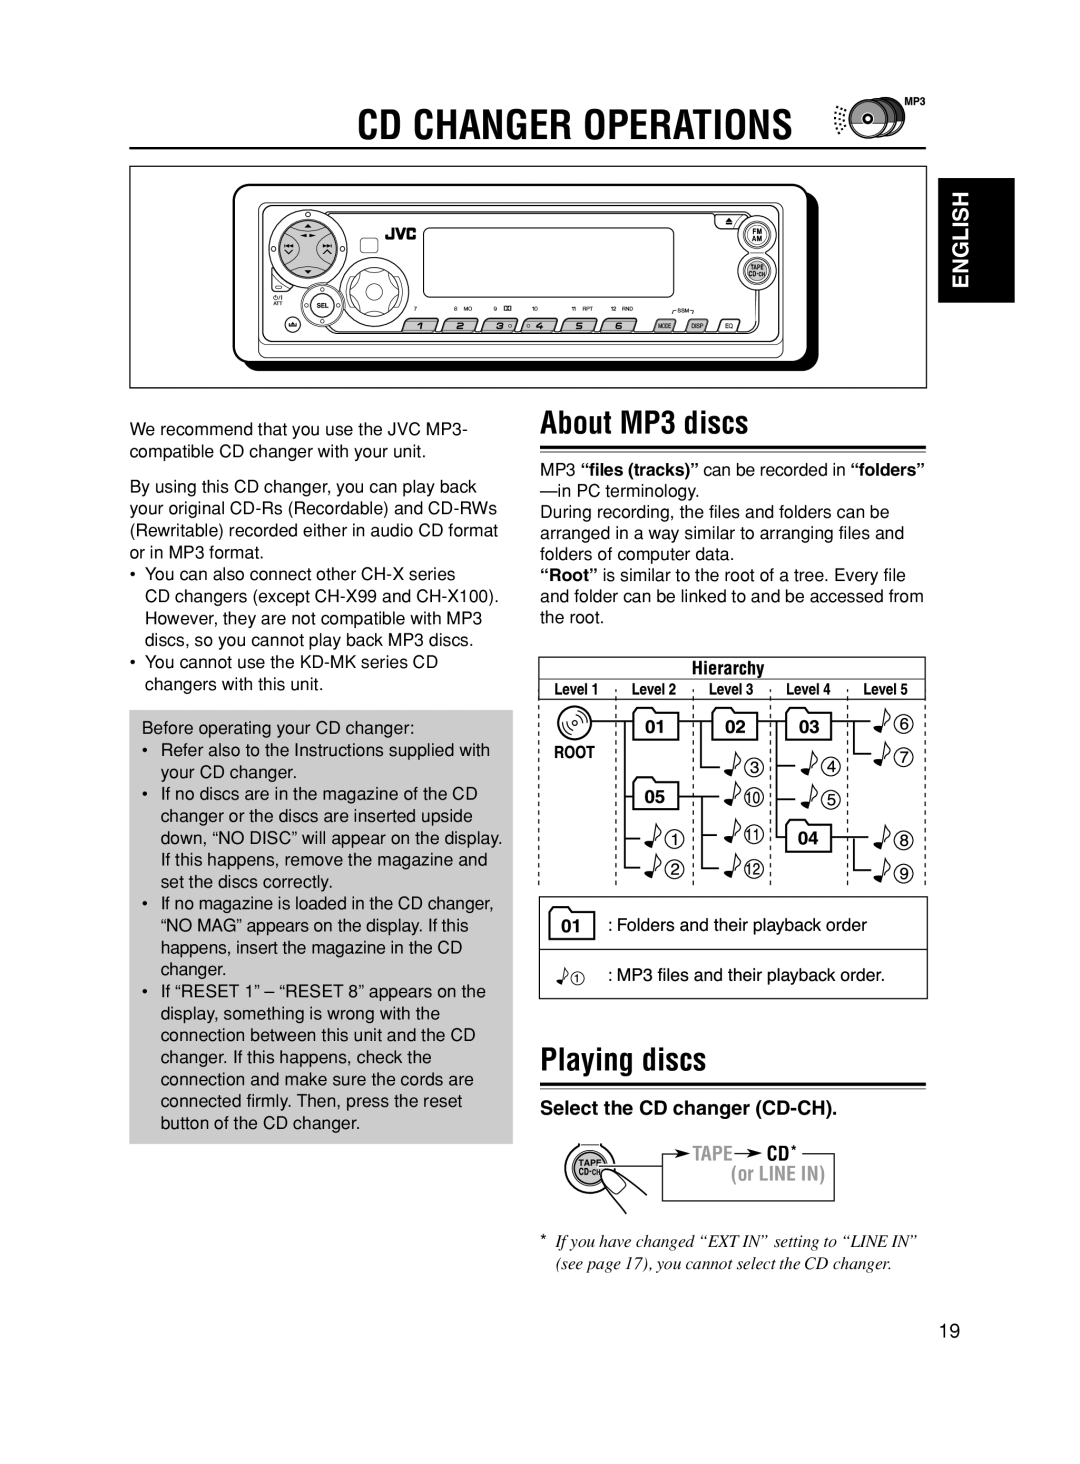 JVC KS-FX490 manual Cd Changer Operations, About MP3 discs, Playing discs, English, Select the CD changer CD-CH, Tape 